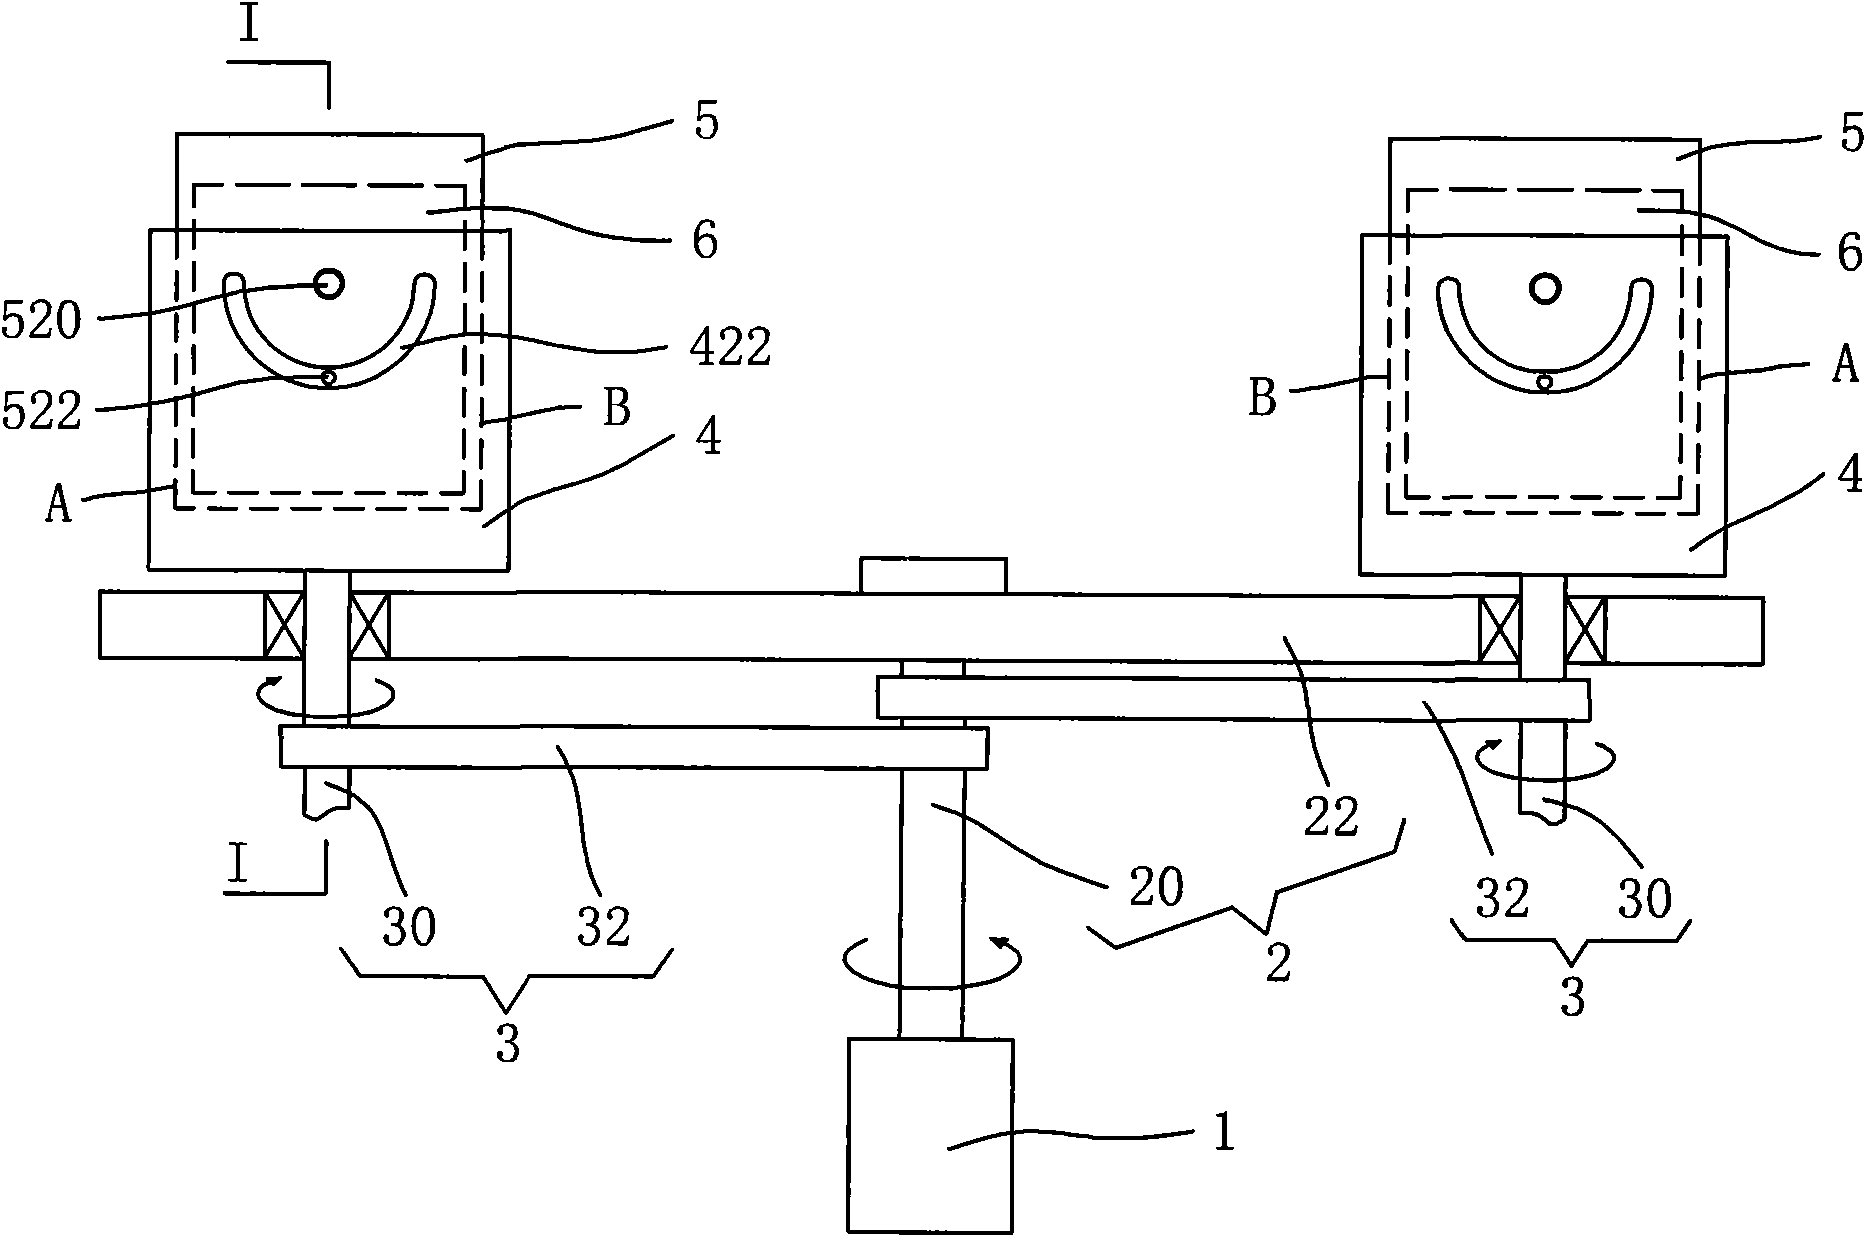 Device for mixing, dispersing and grinding with high mechanical energy